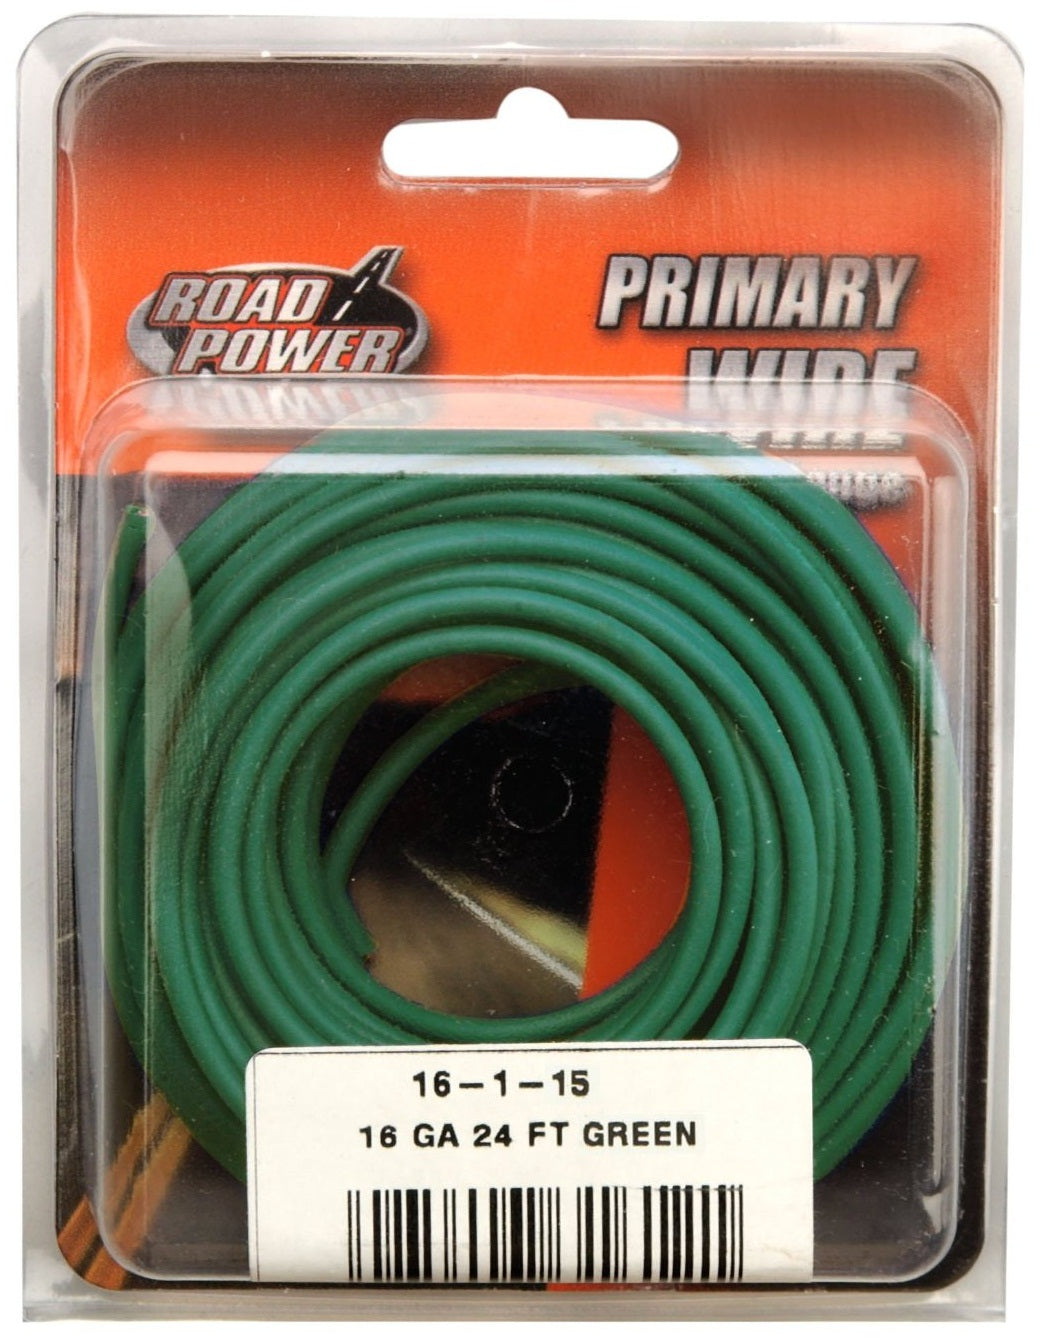 Road Power 56422033 Primary Electrical Wire, 16 Gauge, 24', Green